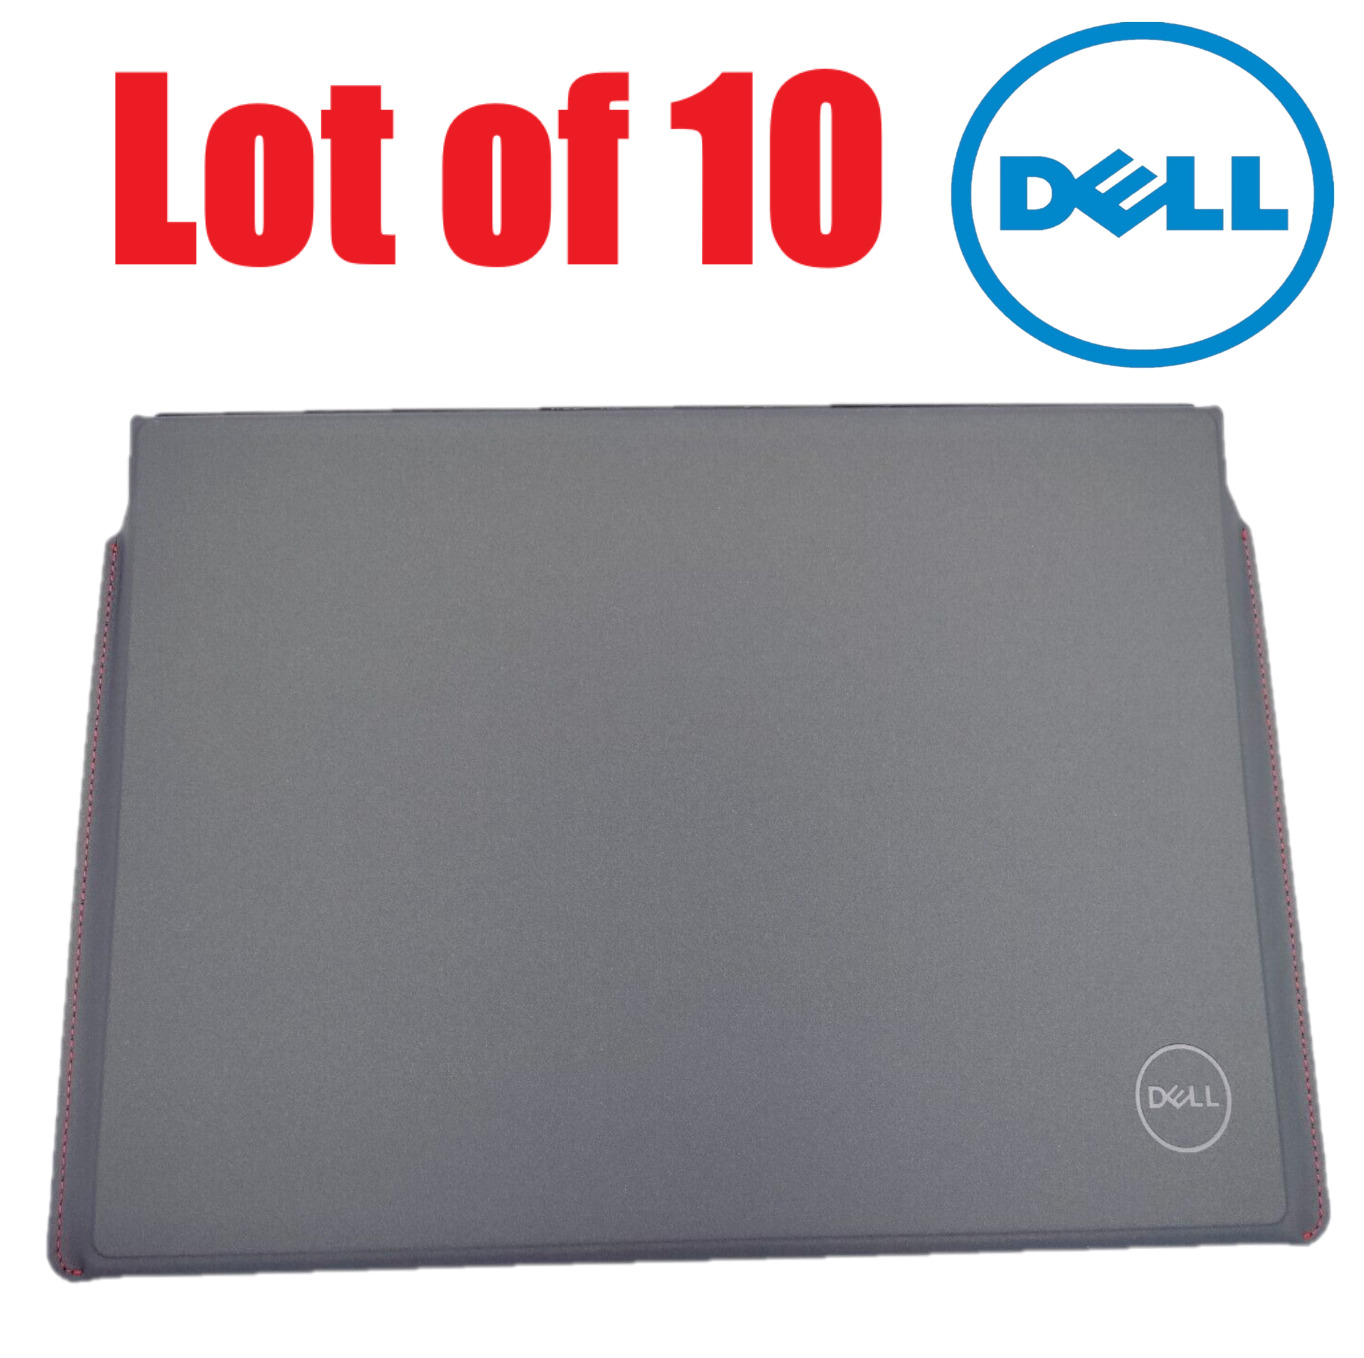 Lot of 10 Genuine Dell Premier Notebook Laptop Ipad Sleeve Bag Under 15-inch